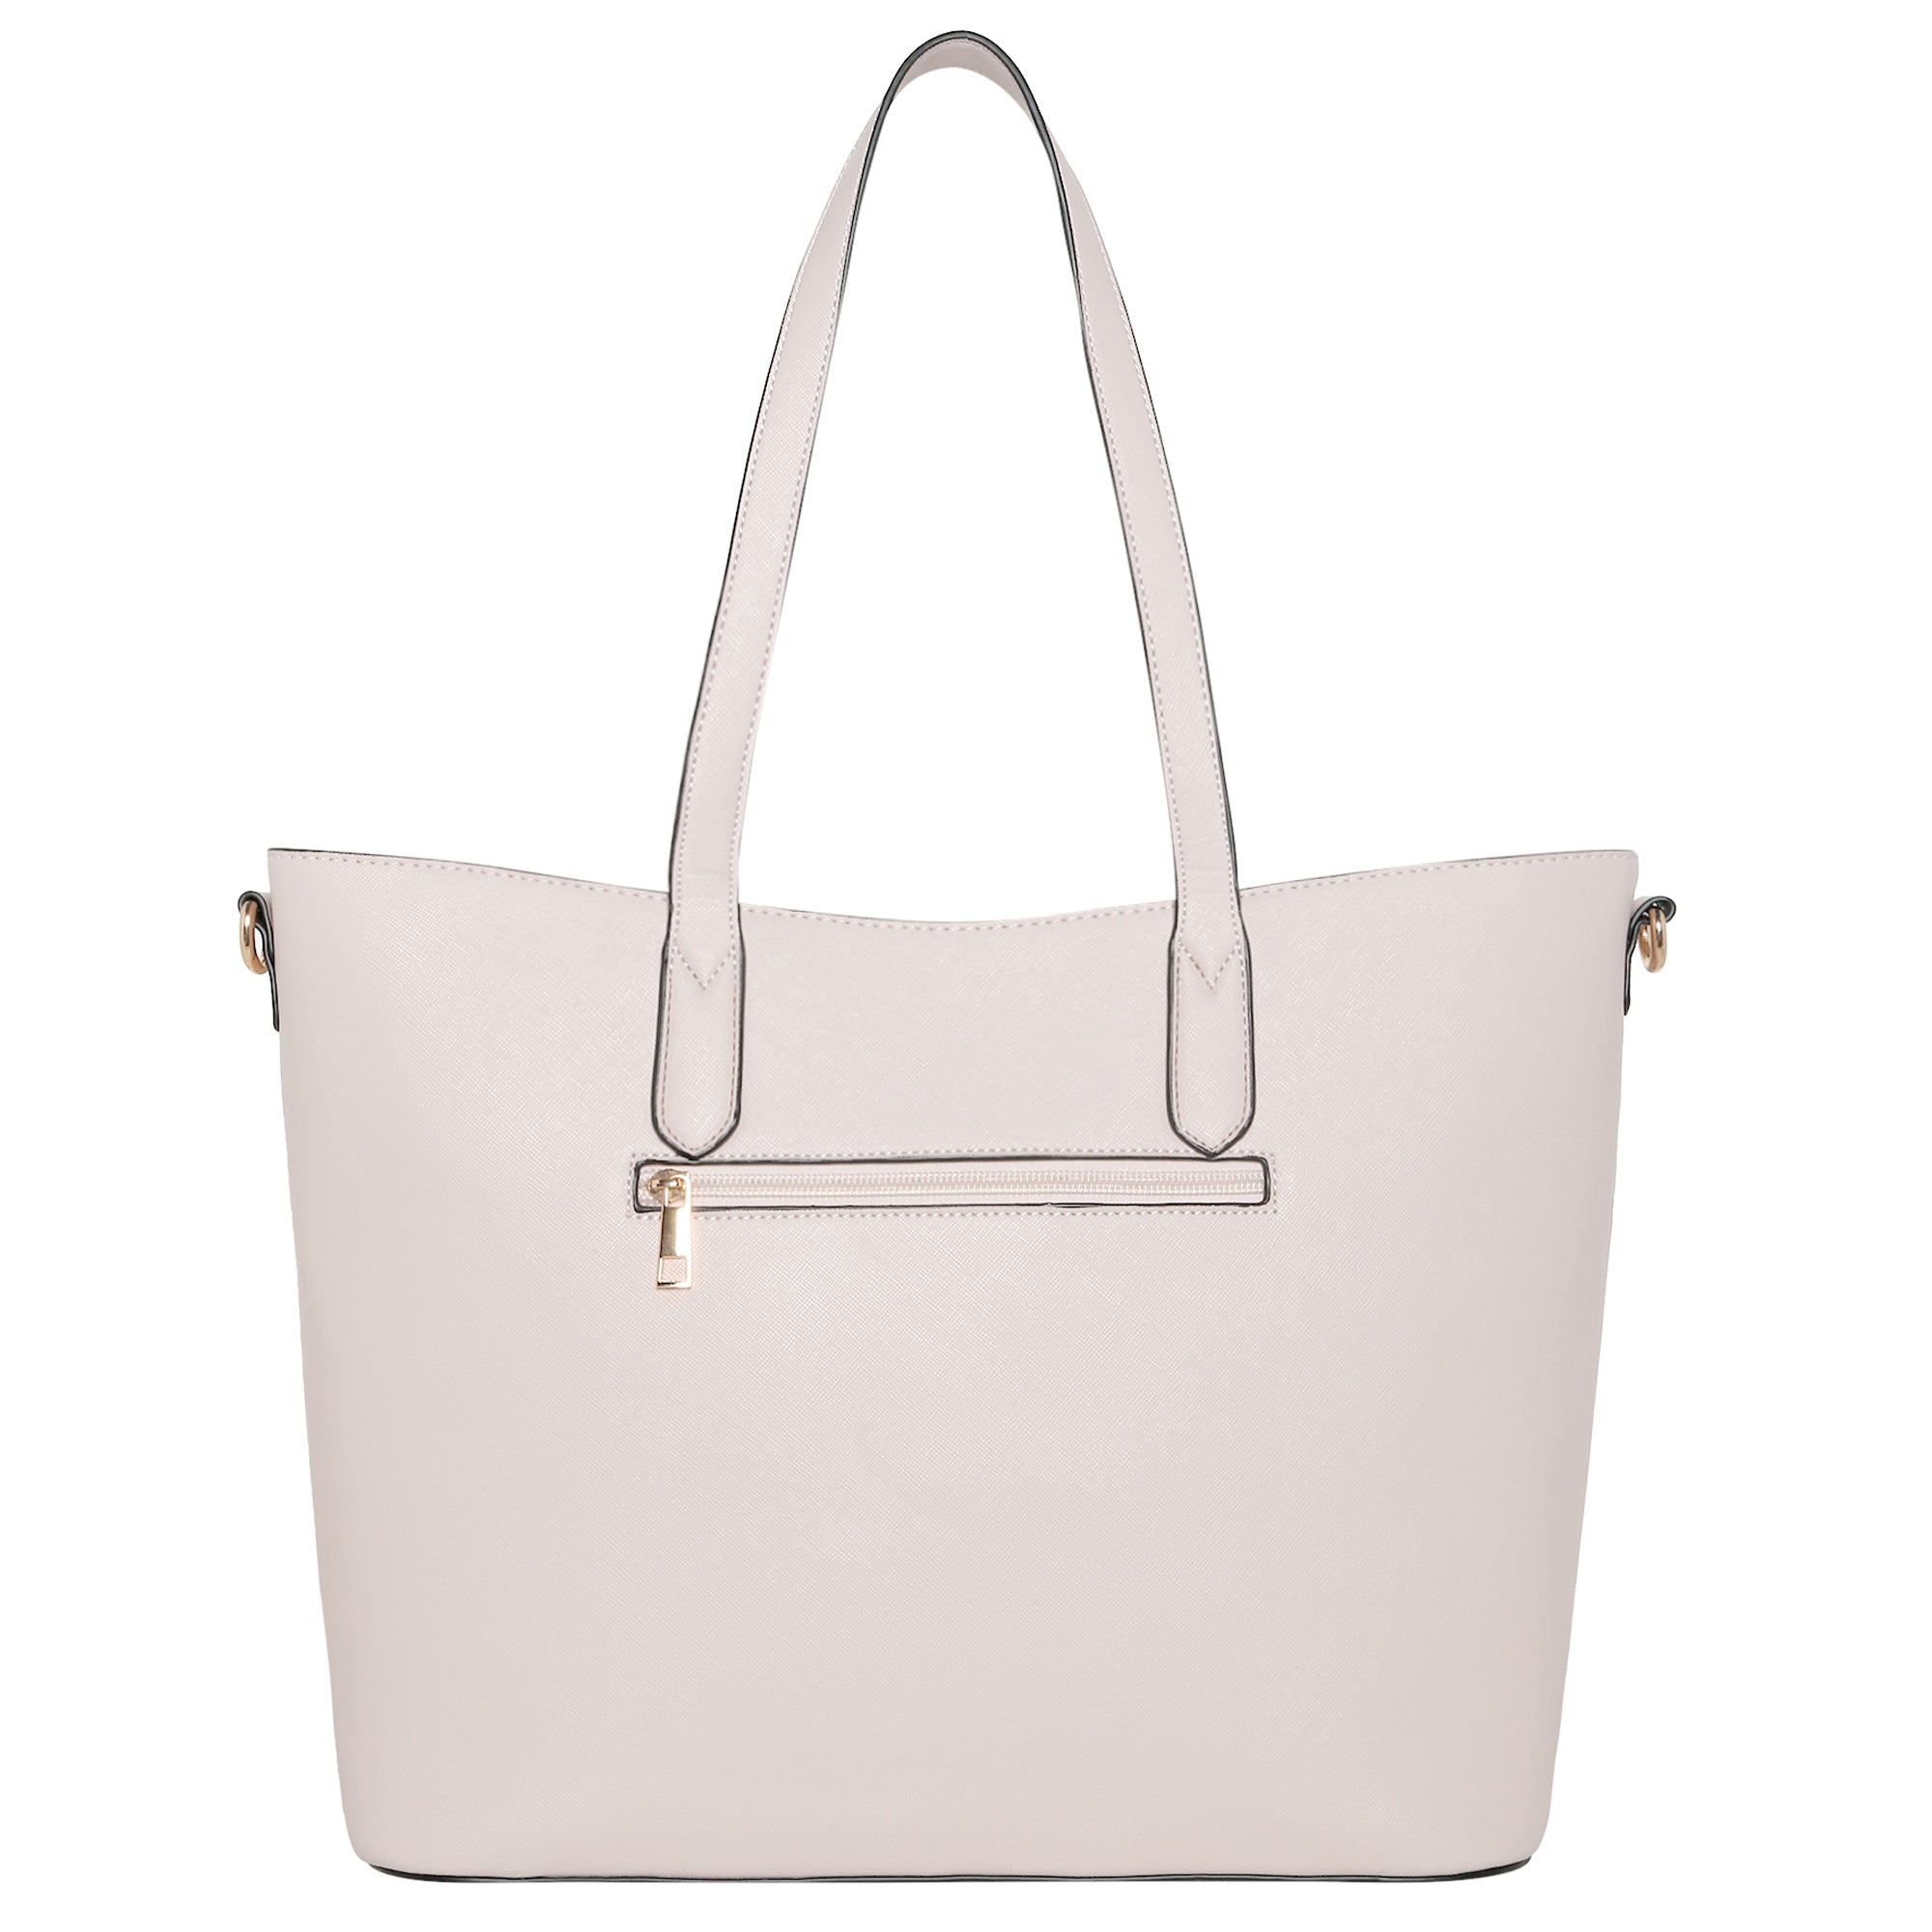 Accessorize London Women's Faux Leather Light Pink Daffodil tote bag